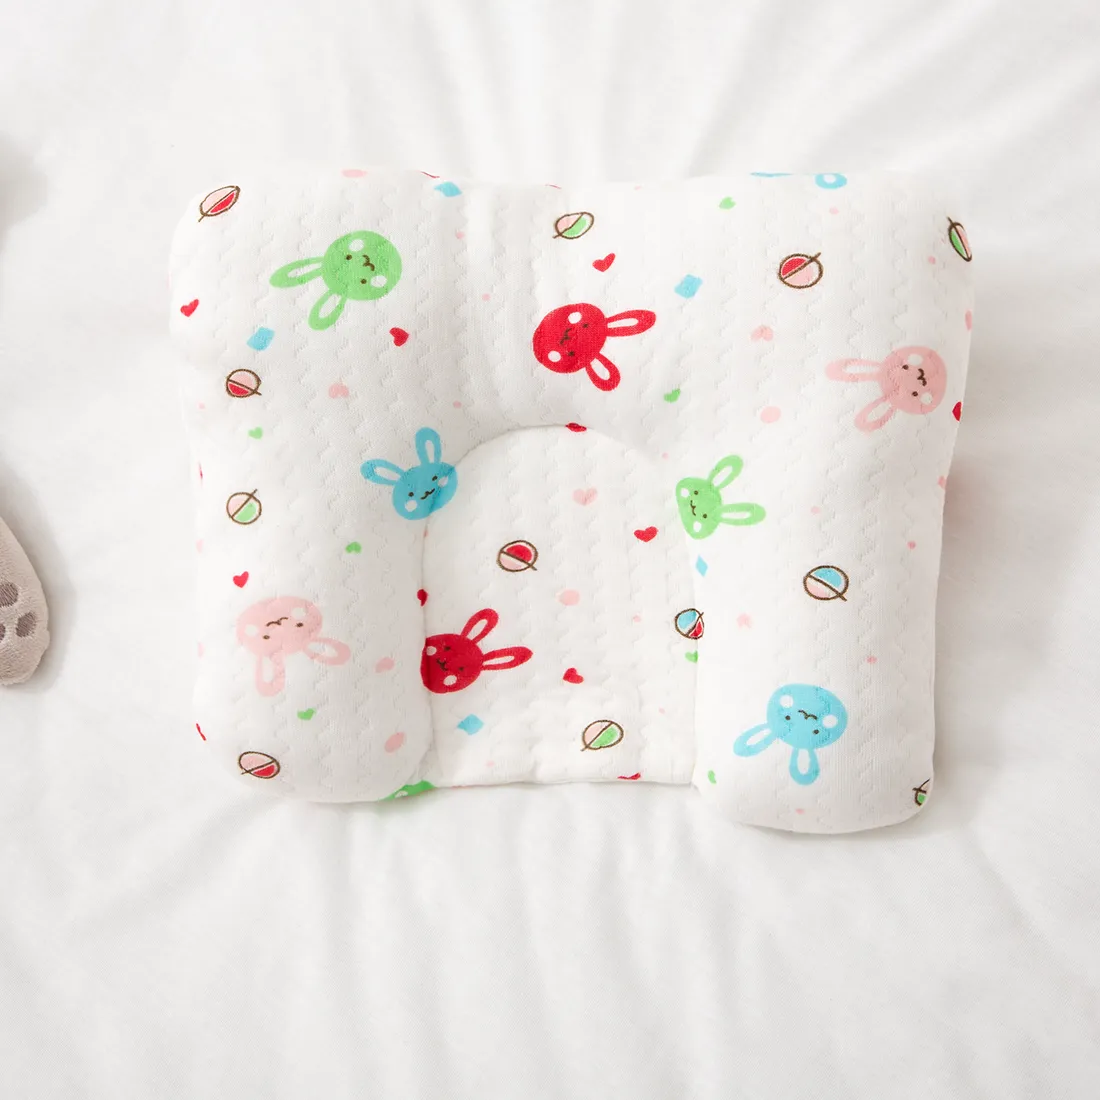 Are Head-Shaping Pillows Safe for Babies?